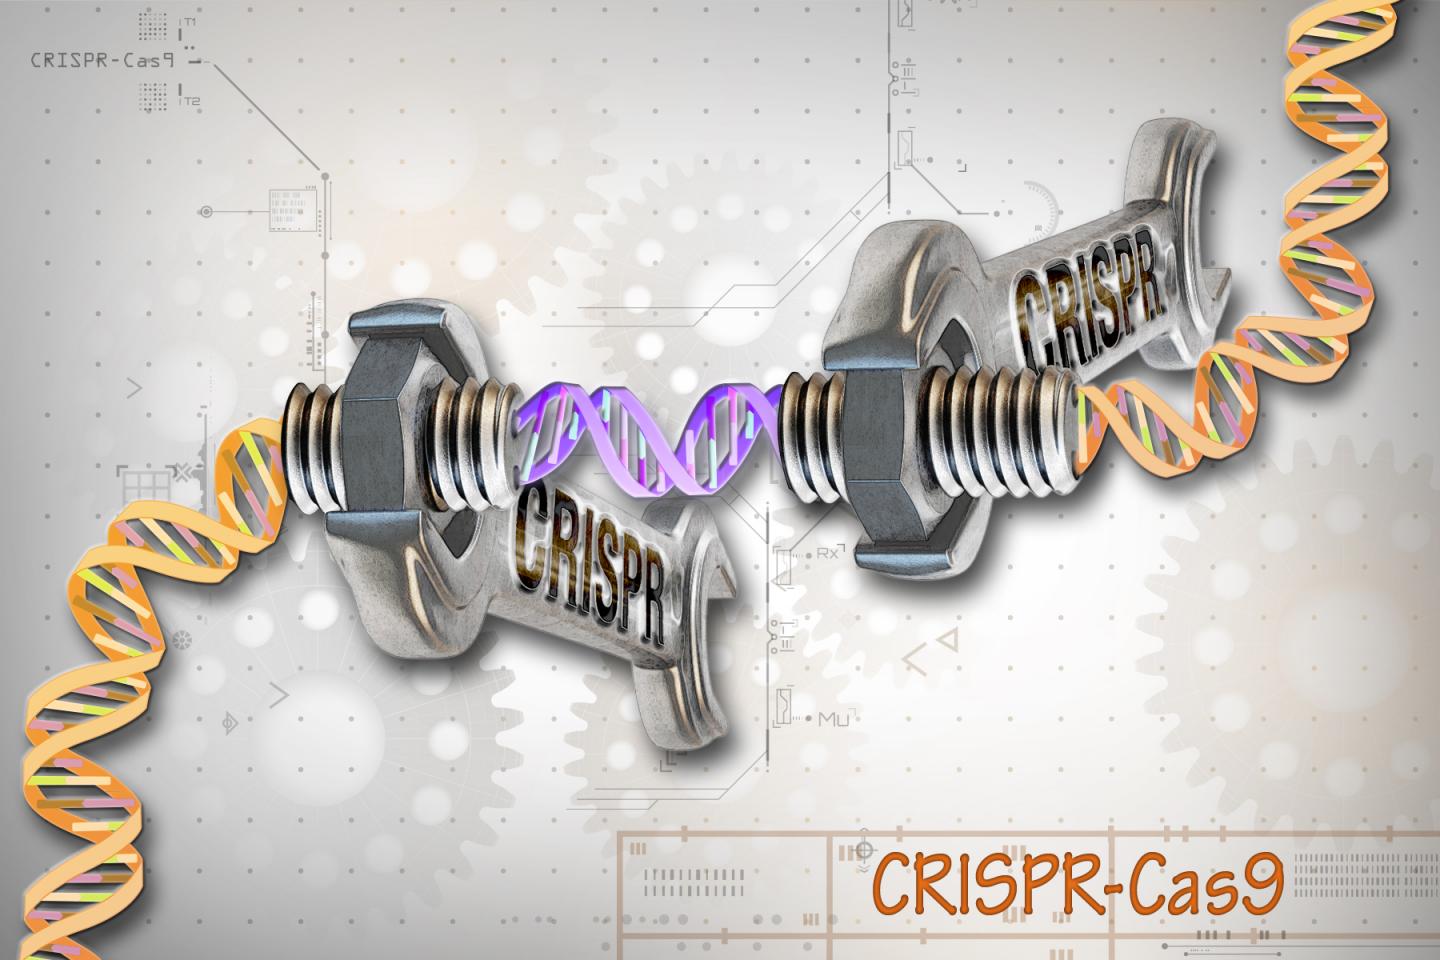 This image depicts a conventional CRISPR-Cas9 system. The Cas9 enzyme acts like a wrench, and specific RNA guides act as different socket heads. Conventional CRISPR-Cas9 systems act continuously, raising the risk of off-target effects. But CRISPR-Cas9 systems that incorporate specially engineered RNAs could act transiently, potentially reducing unwanted changes. [Ernesto del Aguila III, NHGRI]